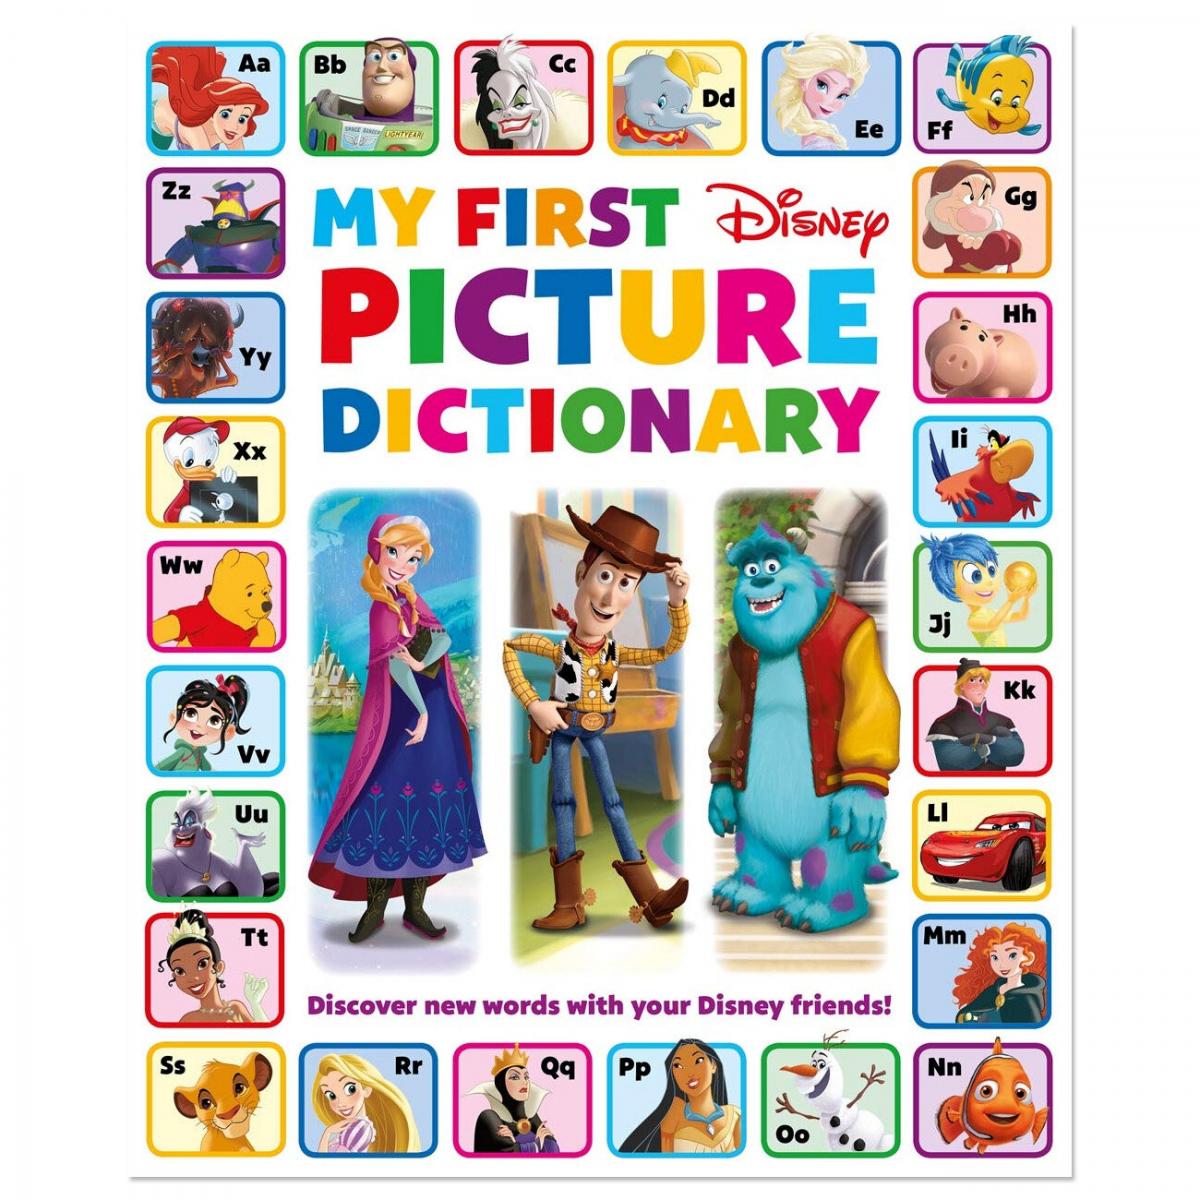 My First Picture Dictionary (parallel)